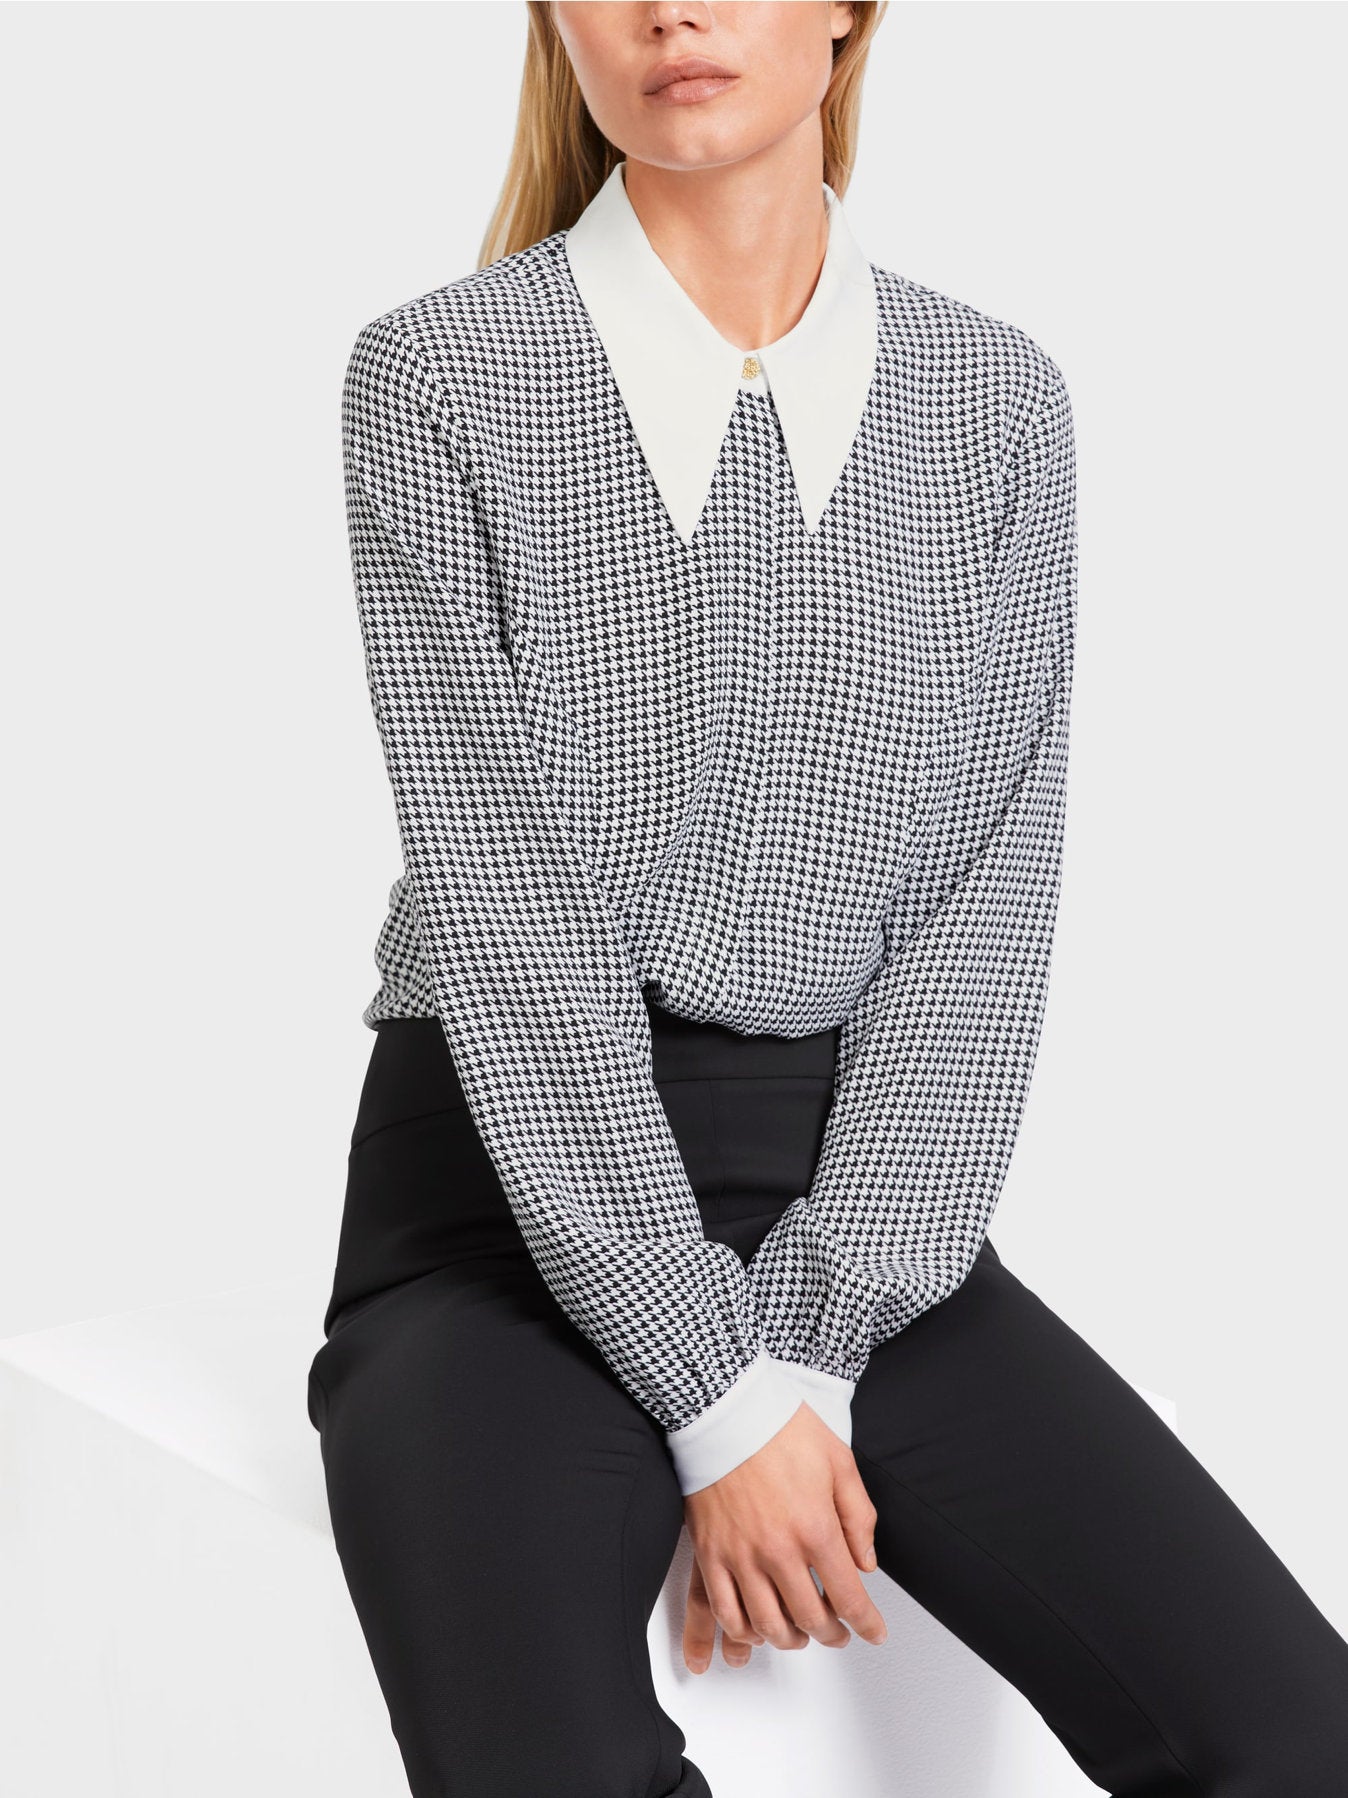 Viscose Blouse With Houndstooth Check_VC 51.34 W28_190_05